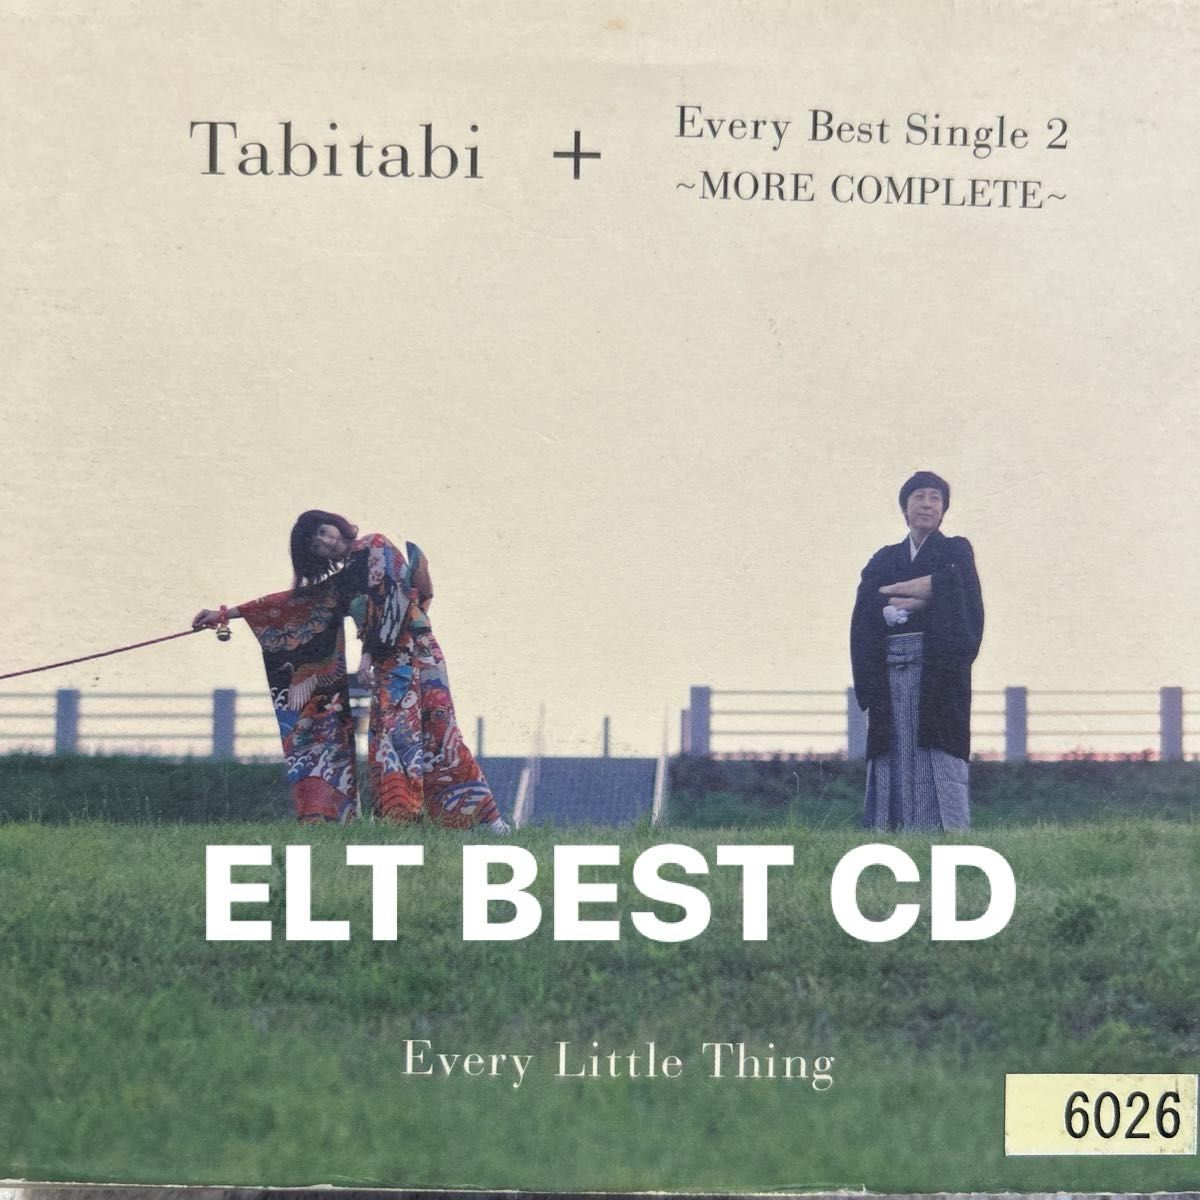 【CD】Every Little Thing TABITABI＋Every Best Sing 2 ~MORE COMPLETE~